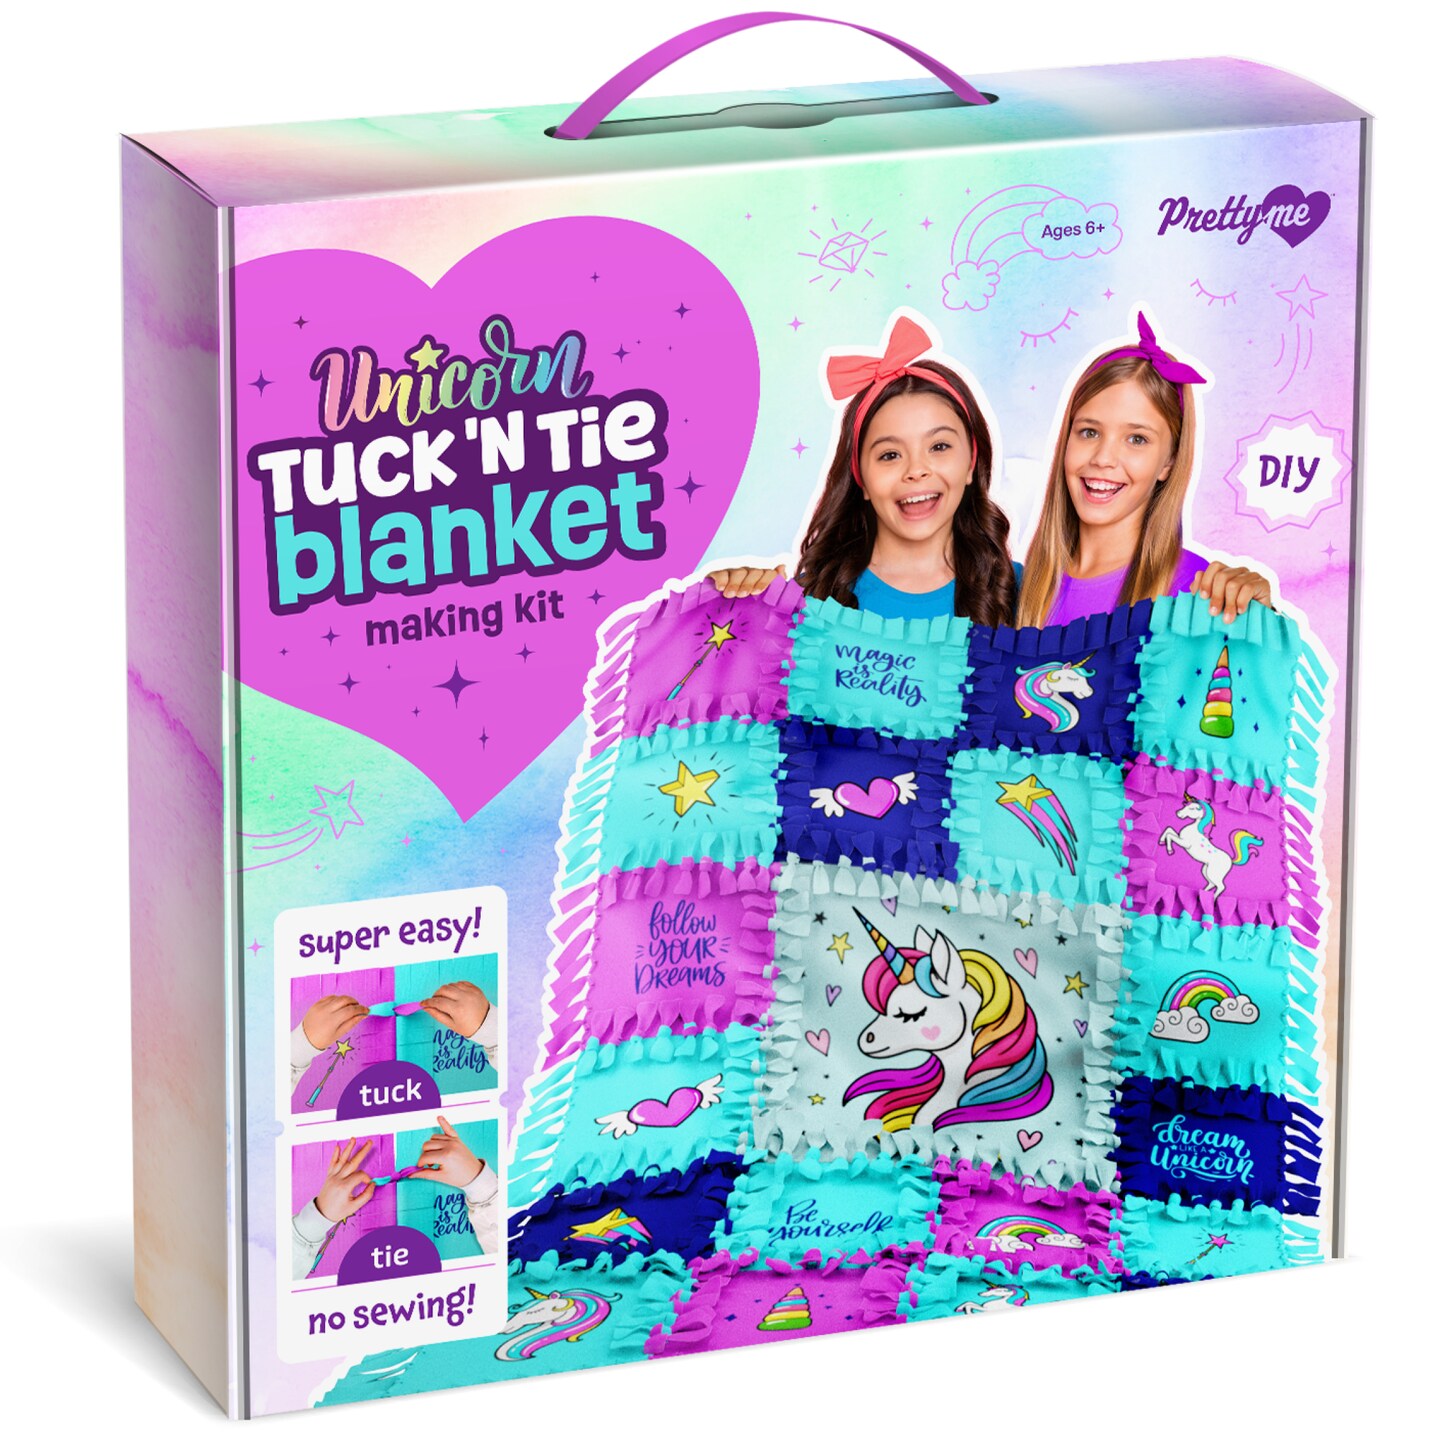 Pretty Me Unicorn Tuck N&#x27; Tie Fleece Blanket Kit - DIY Crafts for for Girls Ages 6+ Year Old - Best Arts &#x26; Craft Girl Gifts Ideas - No Sew Blanket Making Kit - Kids Crafts Gift Toys Kits